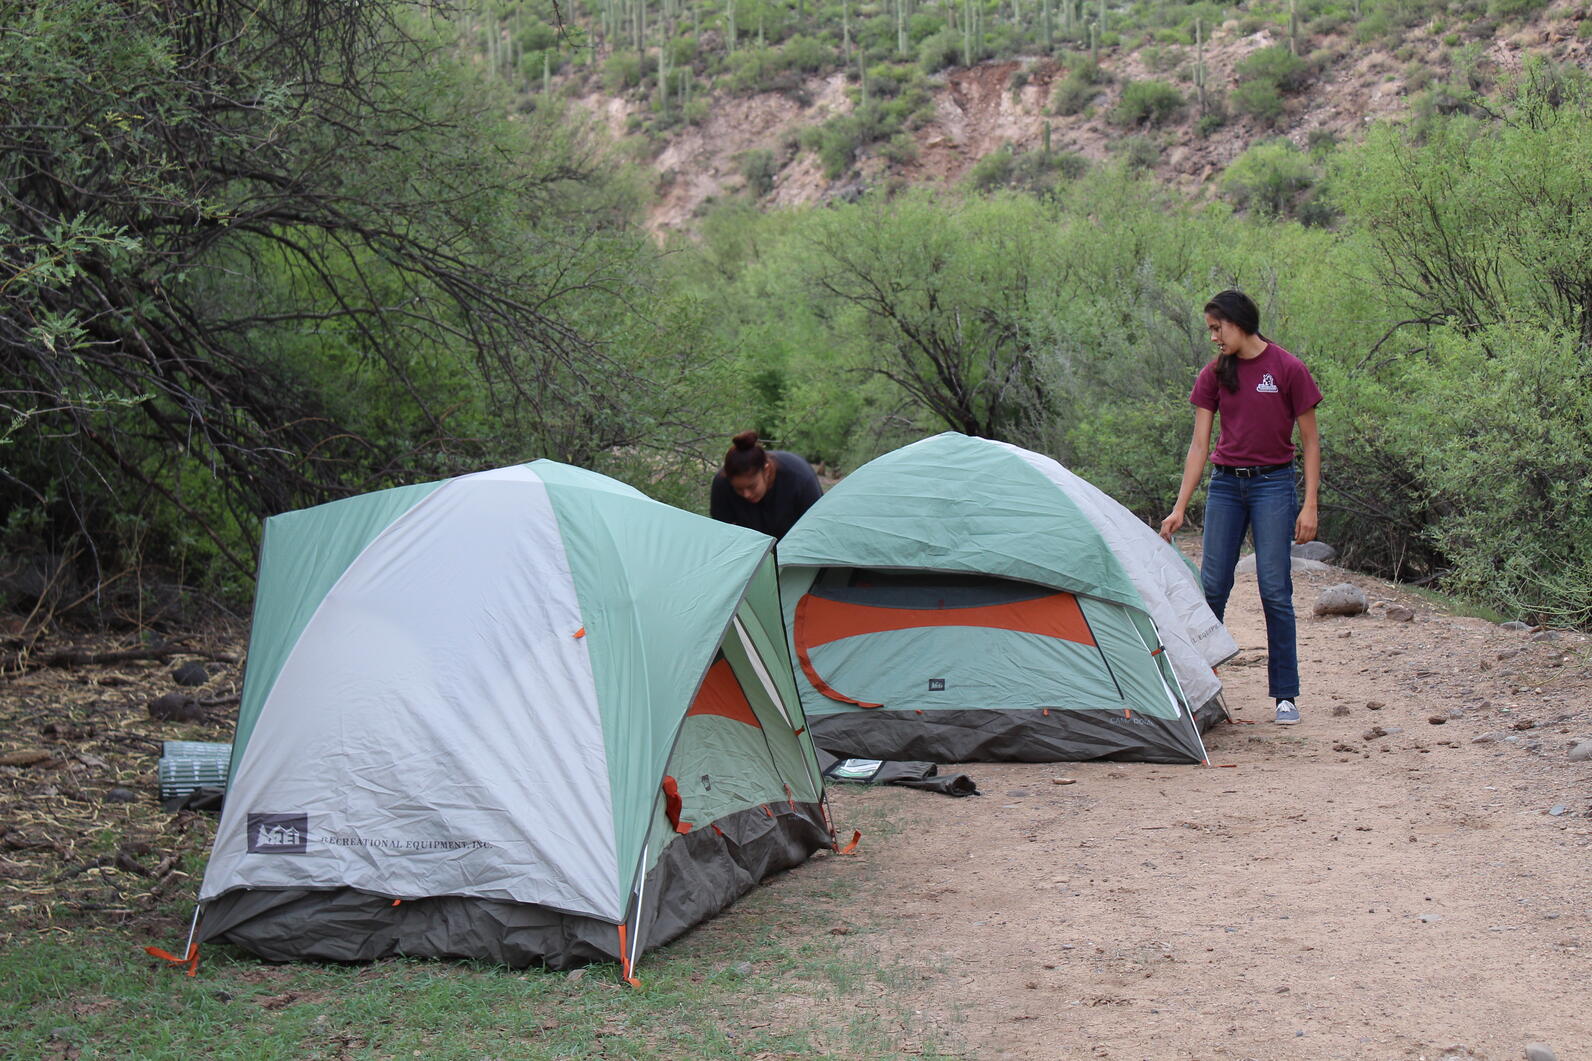 River Pathways interns Nyah Torres and Aritzel Baez prepare for a night on the Agua Fria River the night before a Yellow-billed Cuckoo survey. 